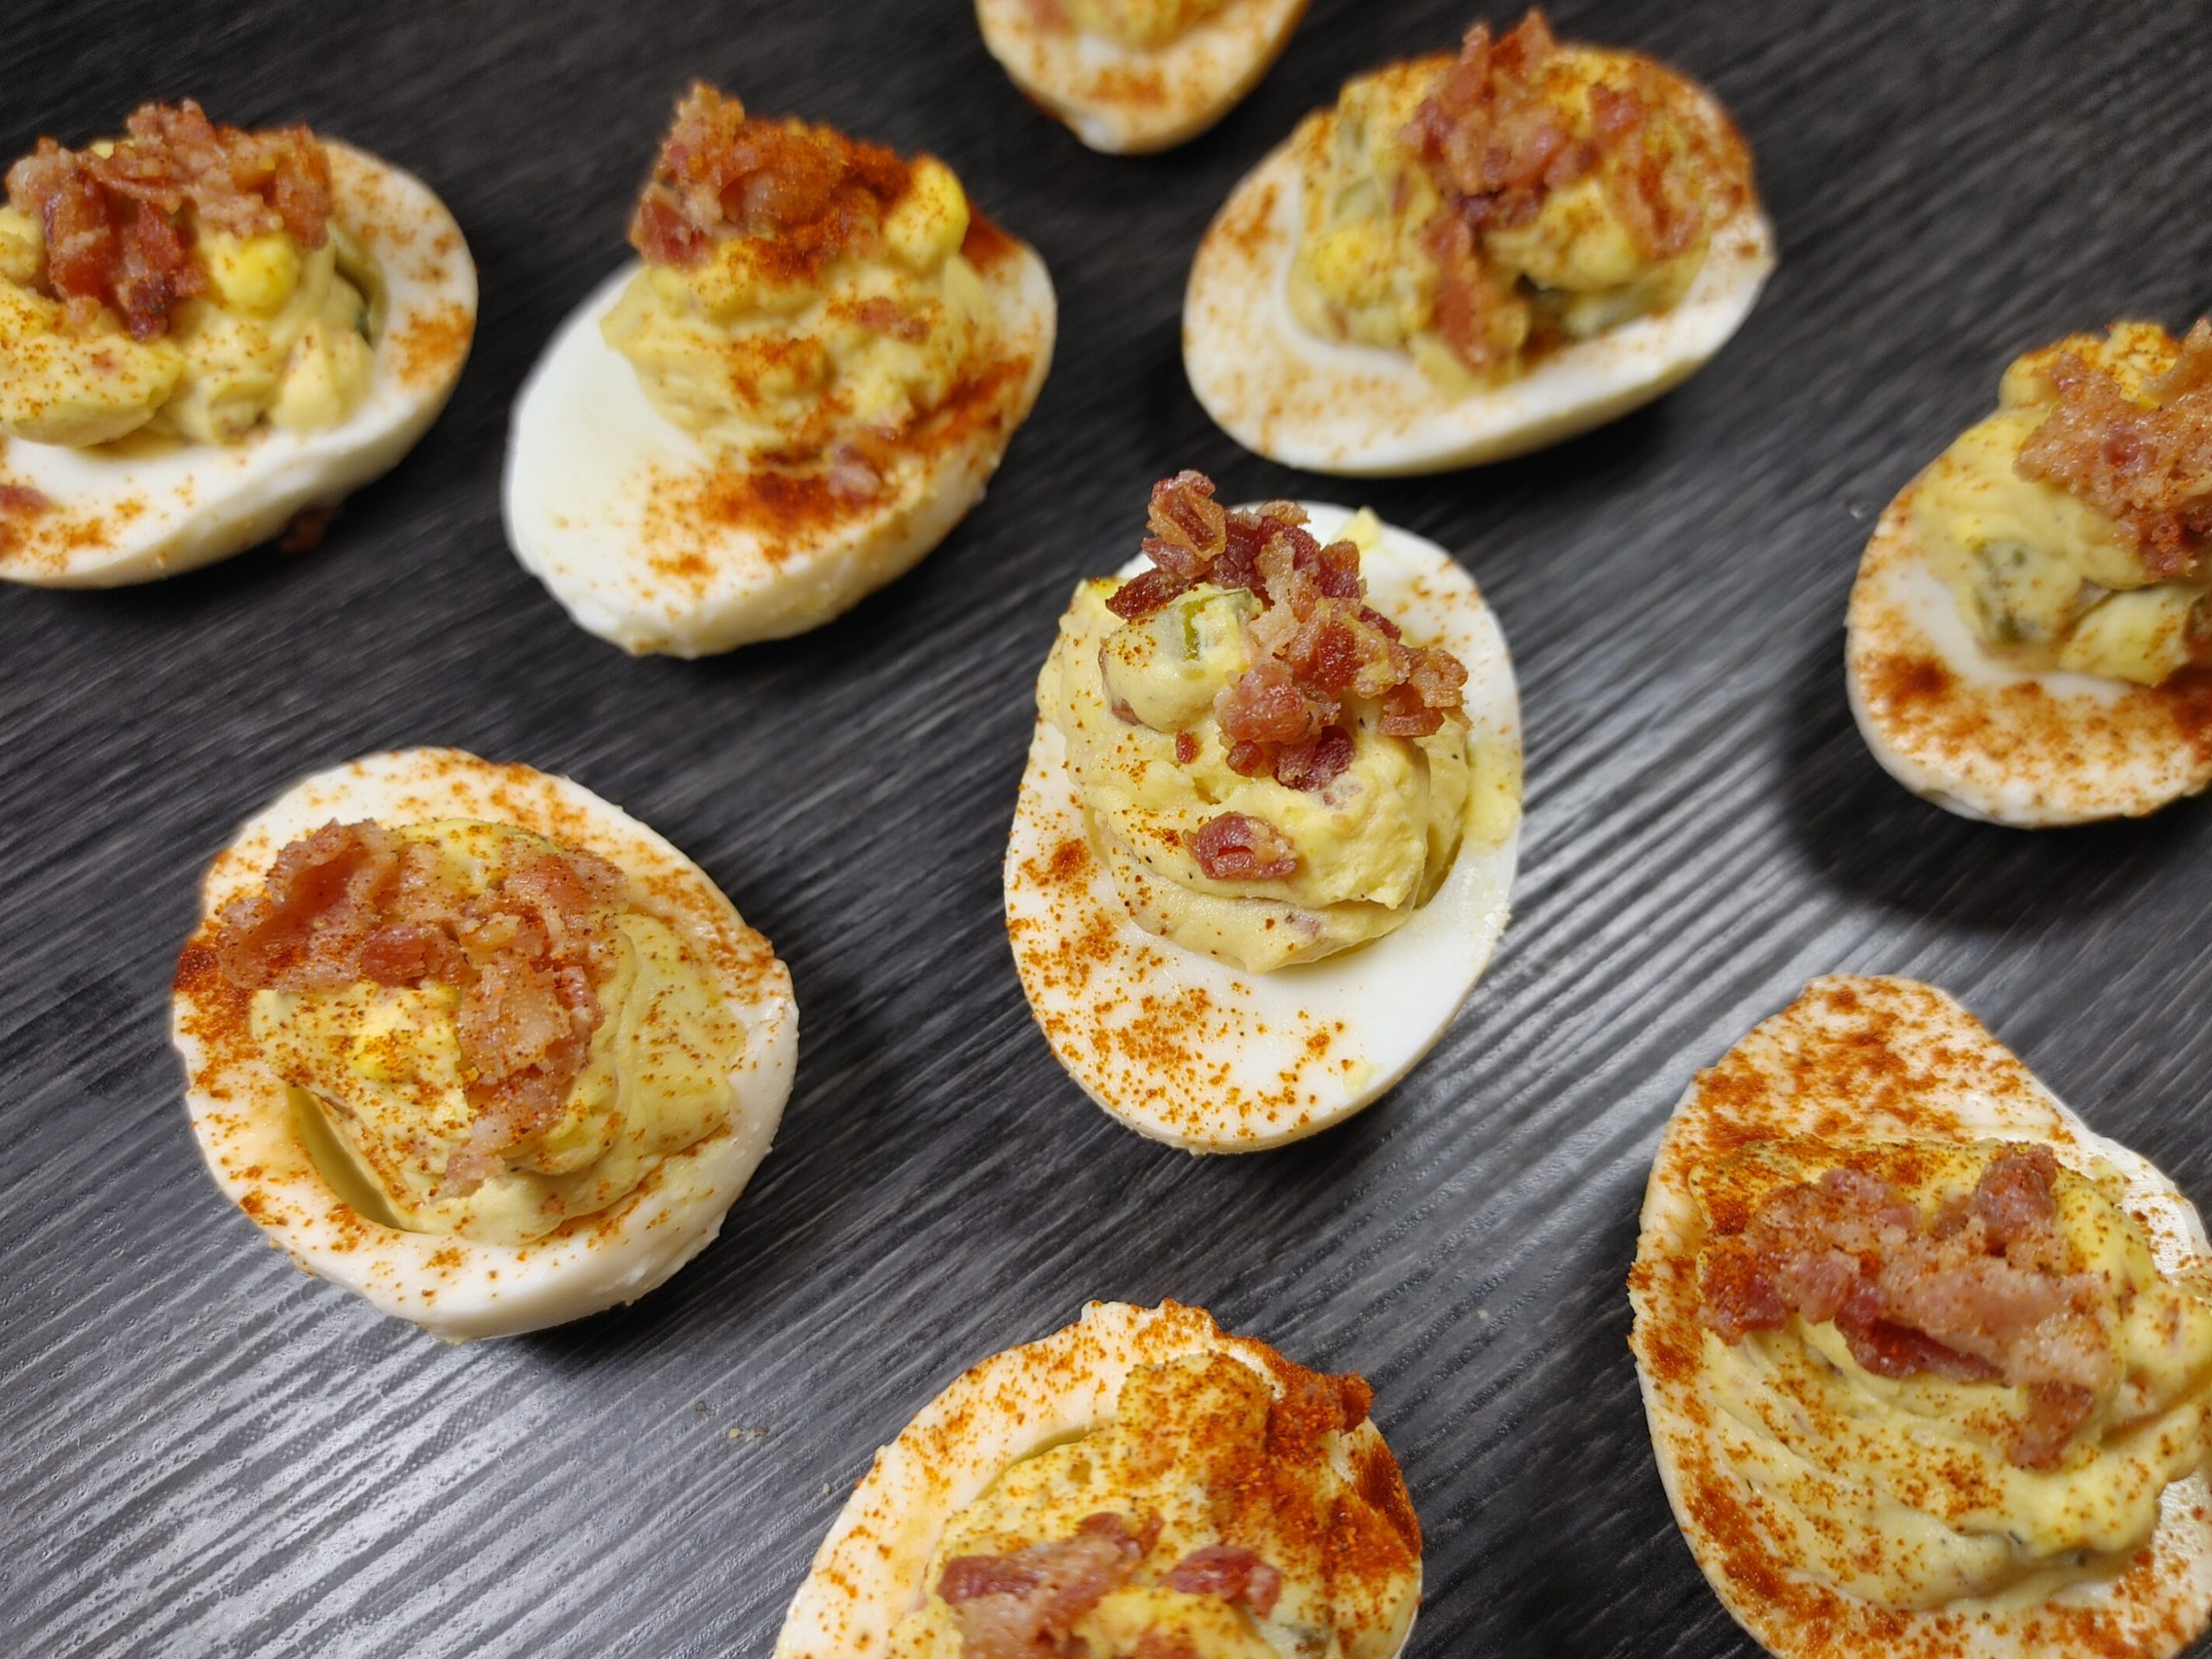 The Best Loaded Deviled Eggs